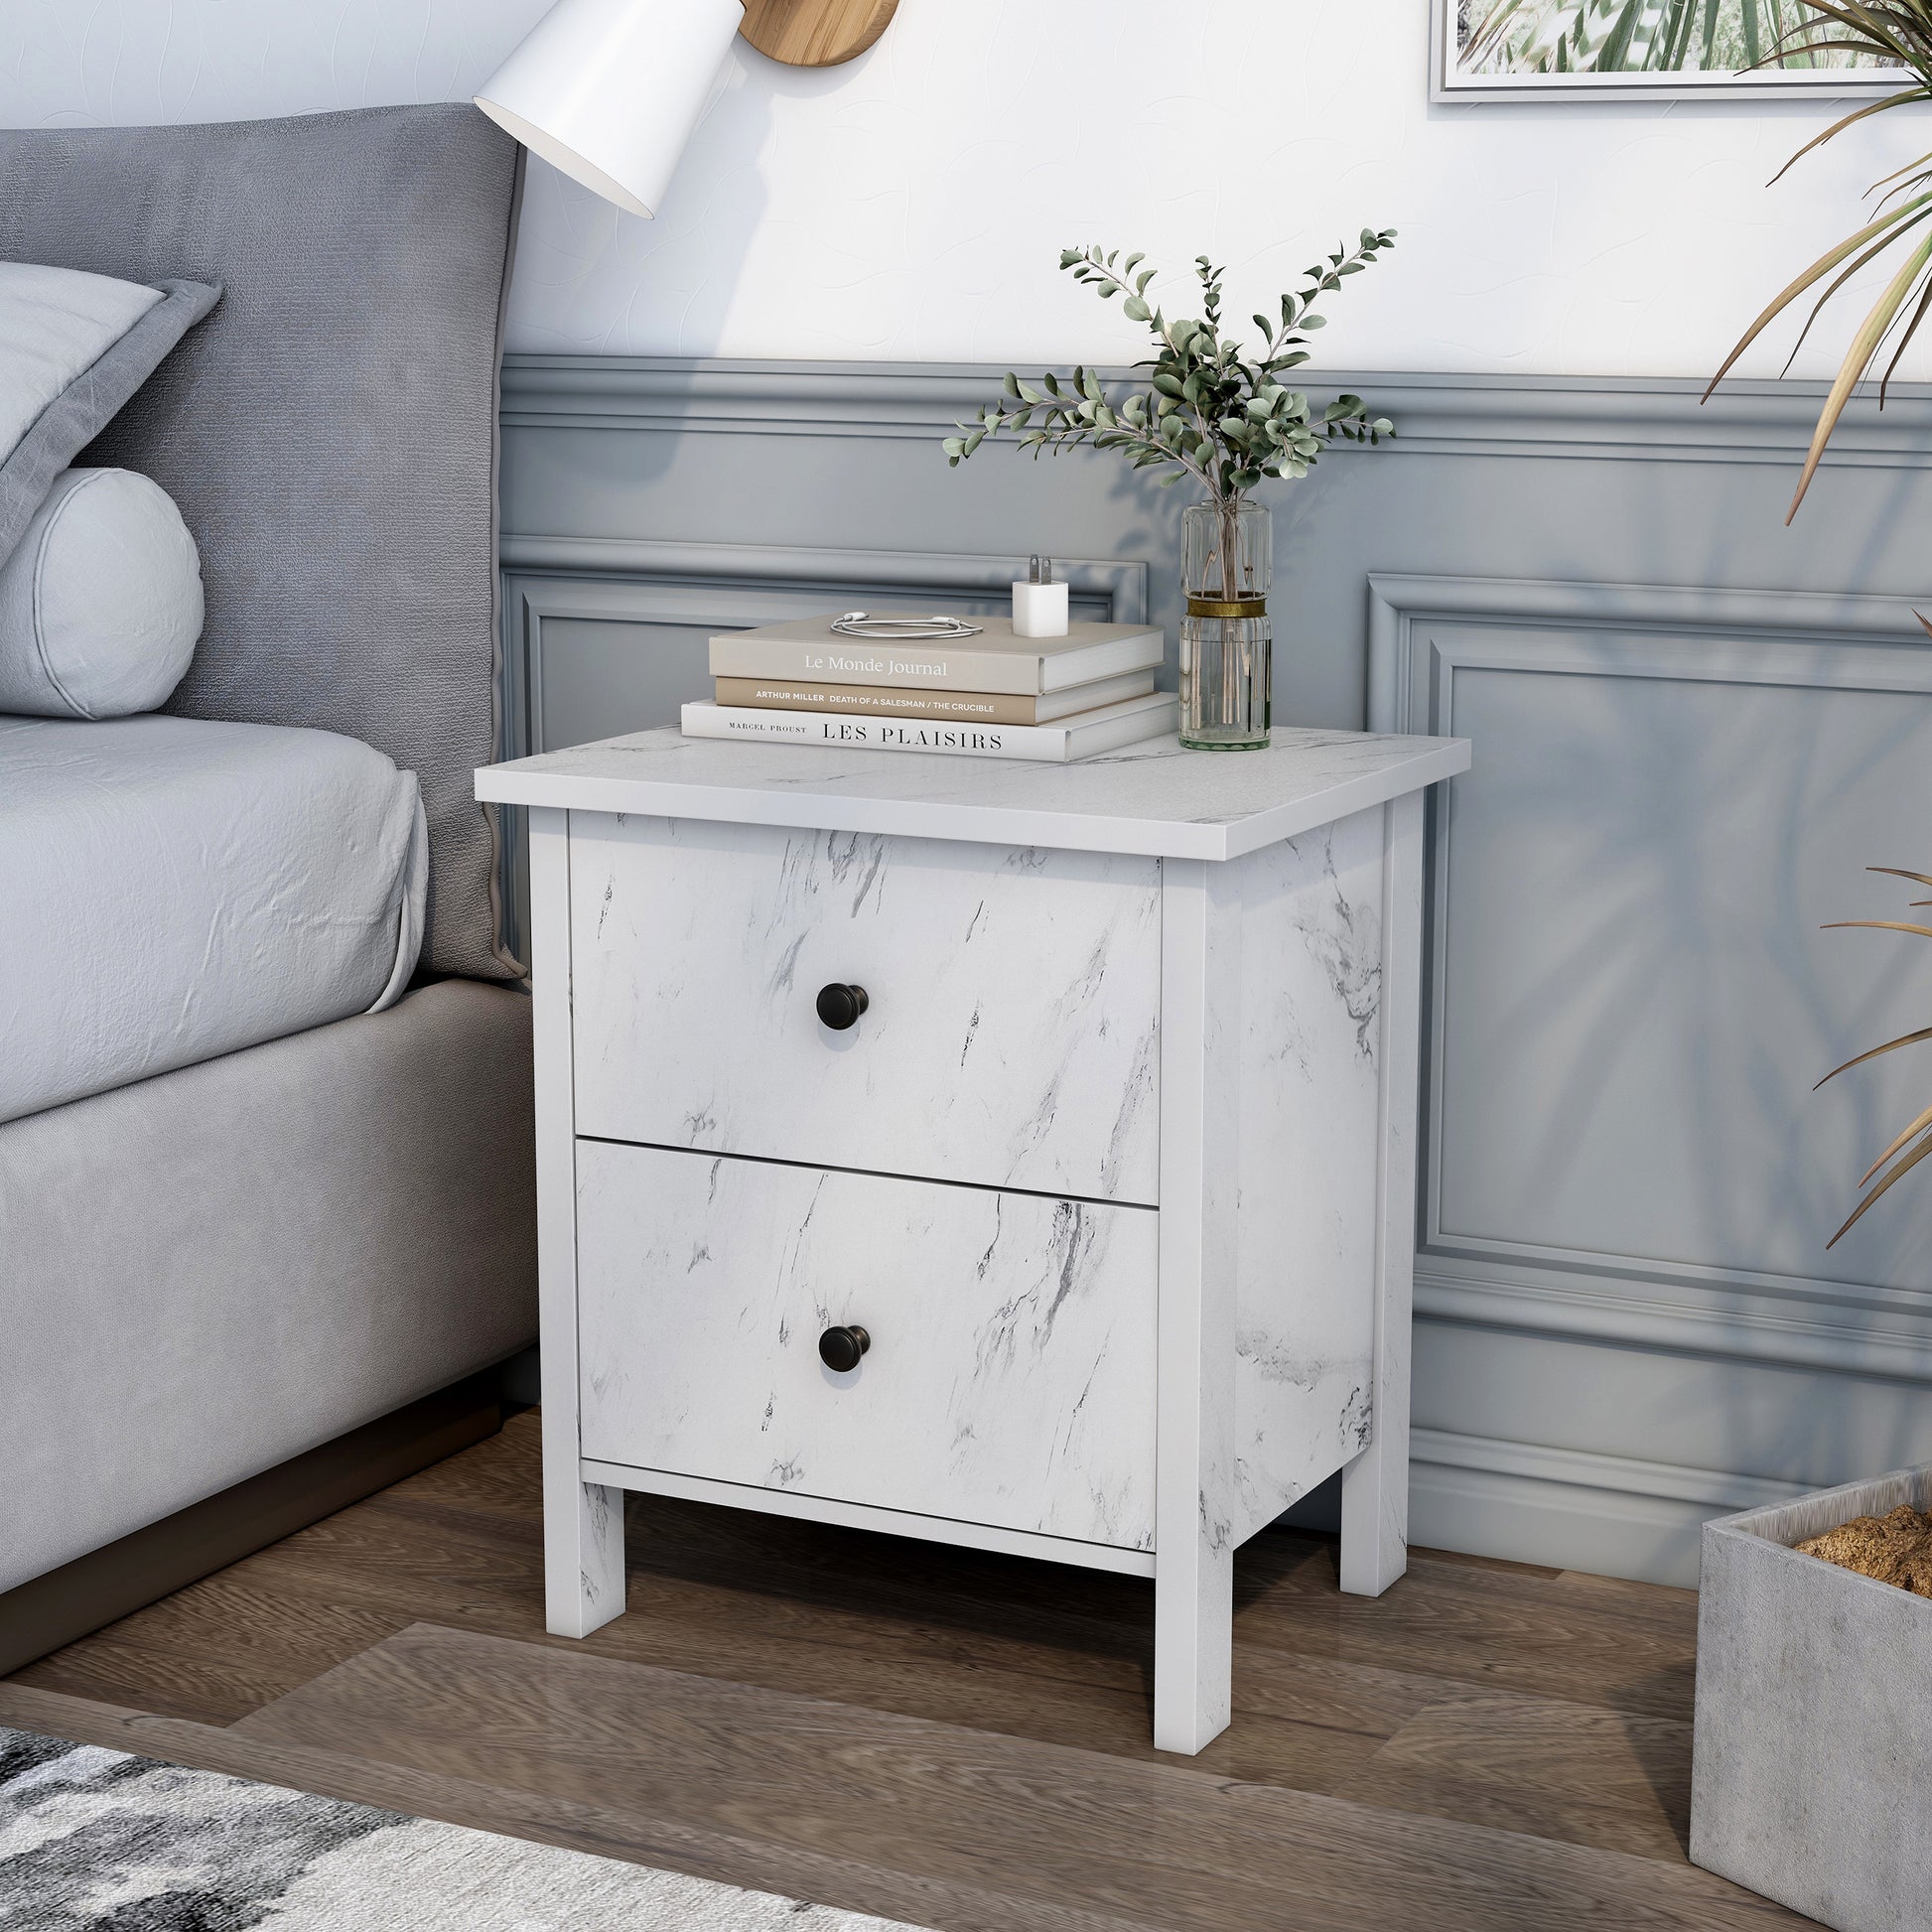 Left angled transitional white faux marble two-drawer nightstand in a bedroom with accessories